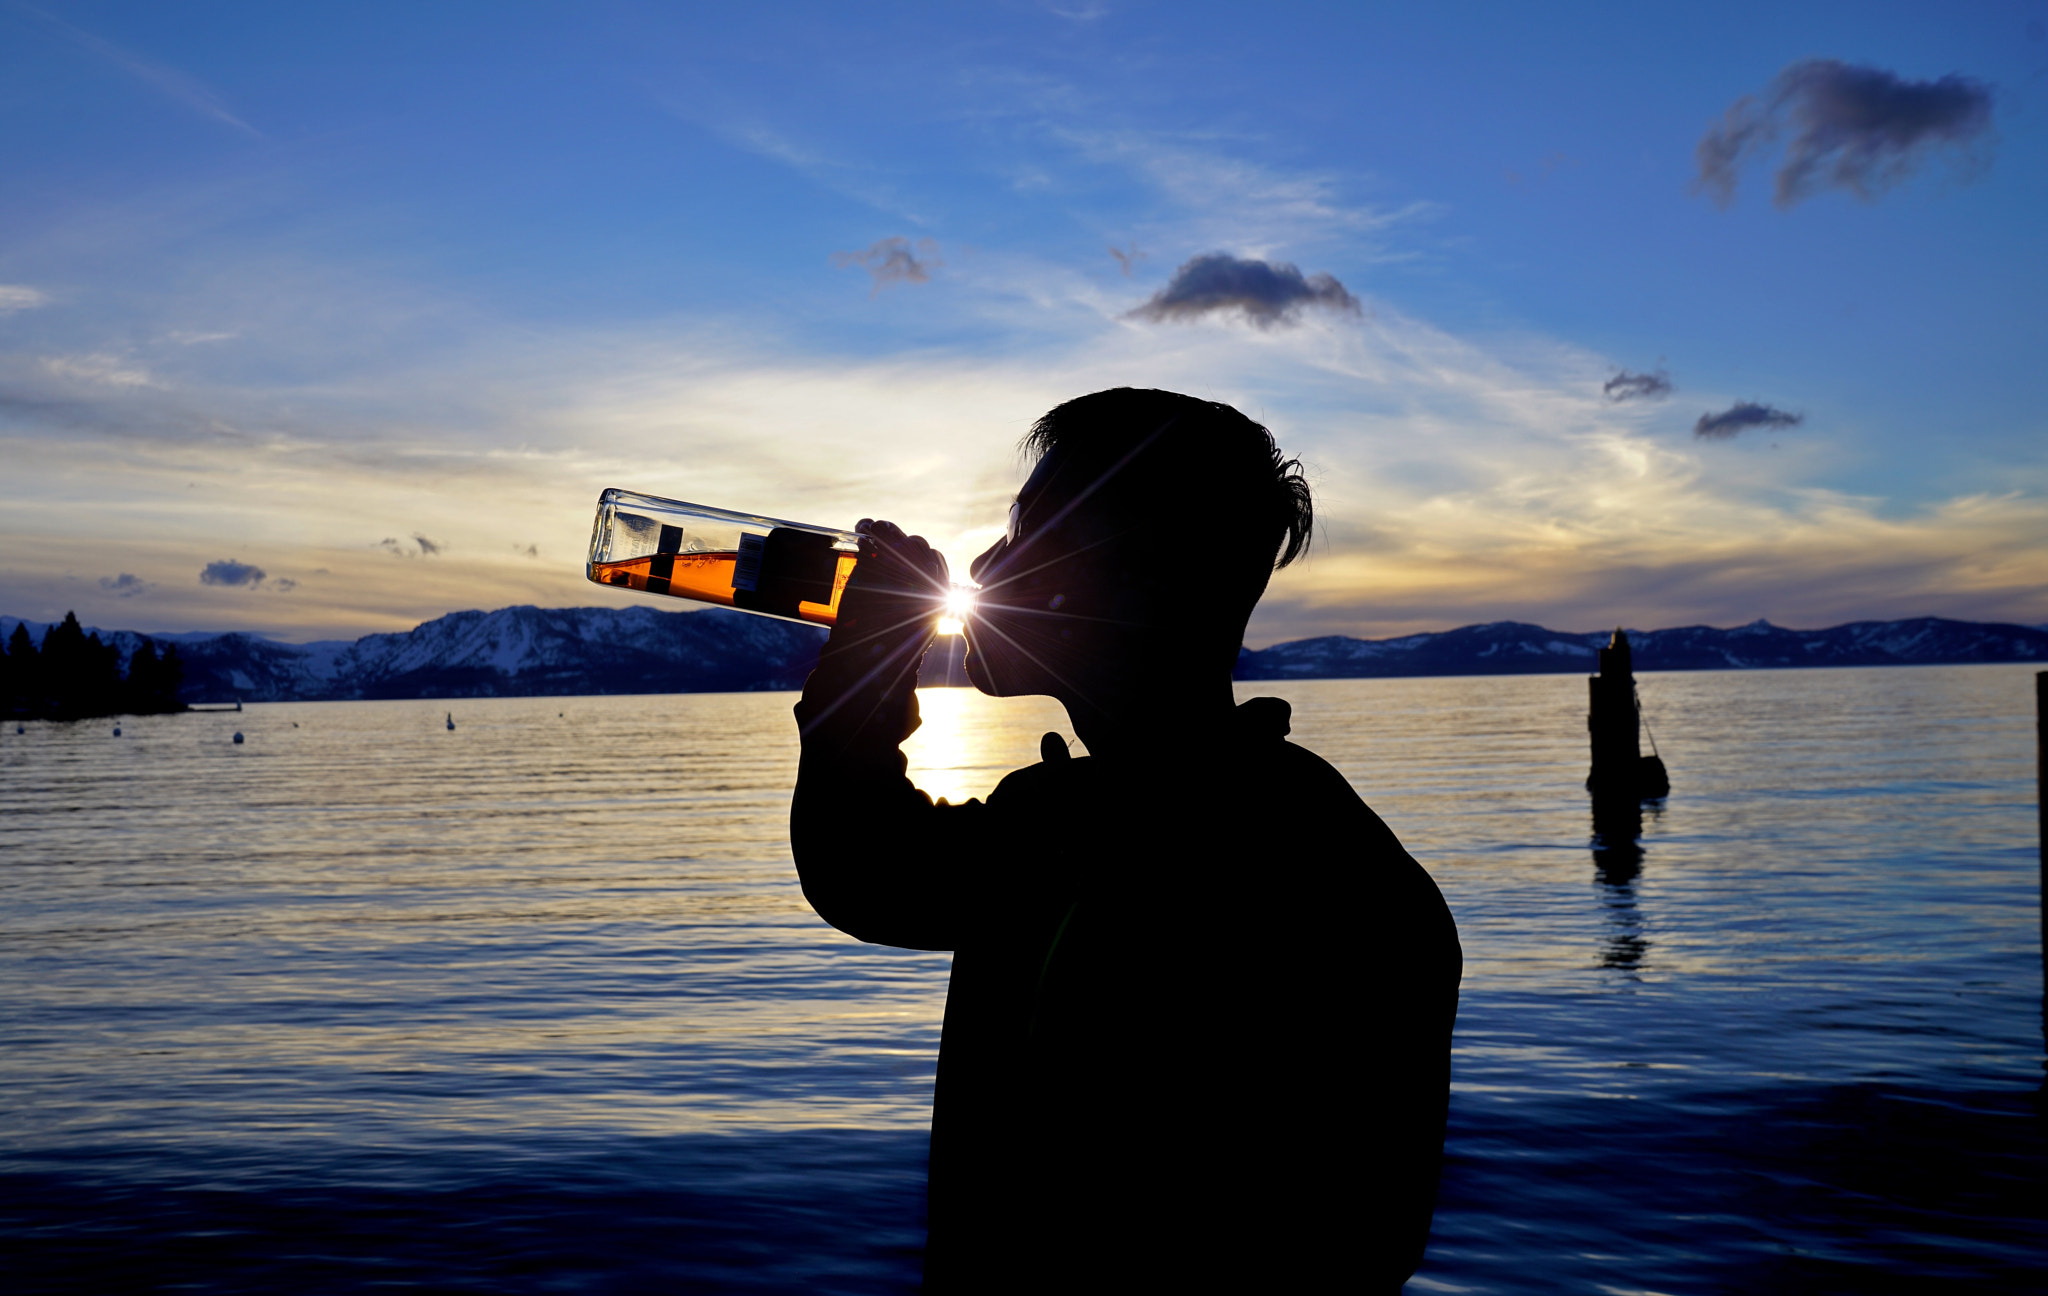 Sony a7R II sample photo. My friend have some whiskey at sunset in south lake tahoe over the weekend. photography